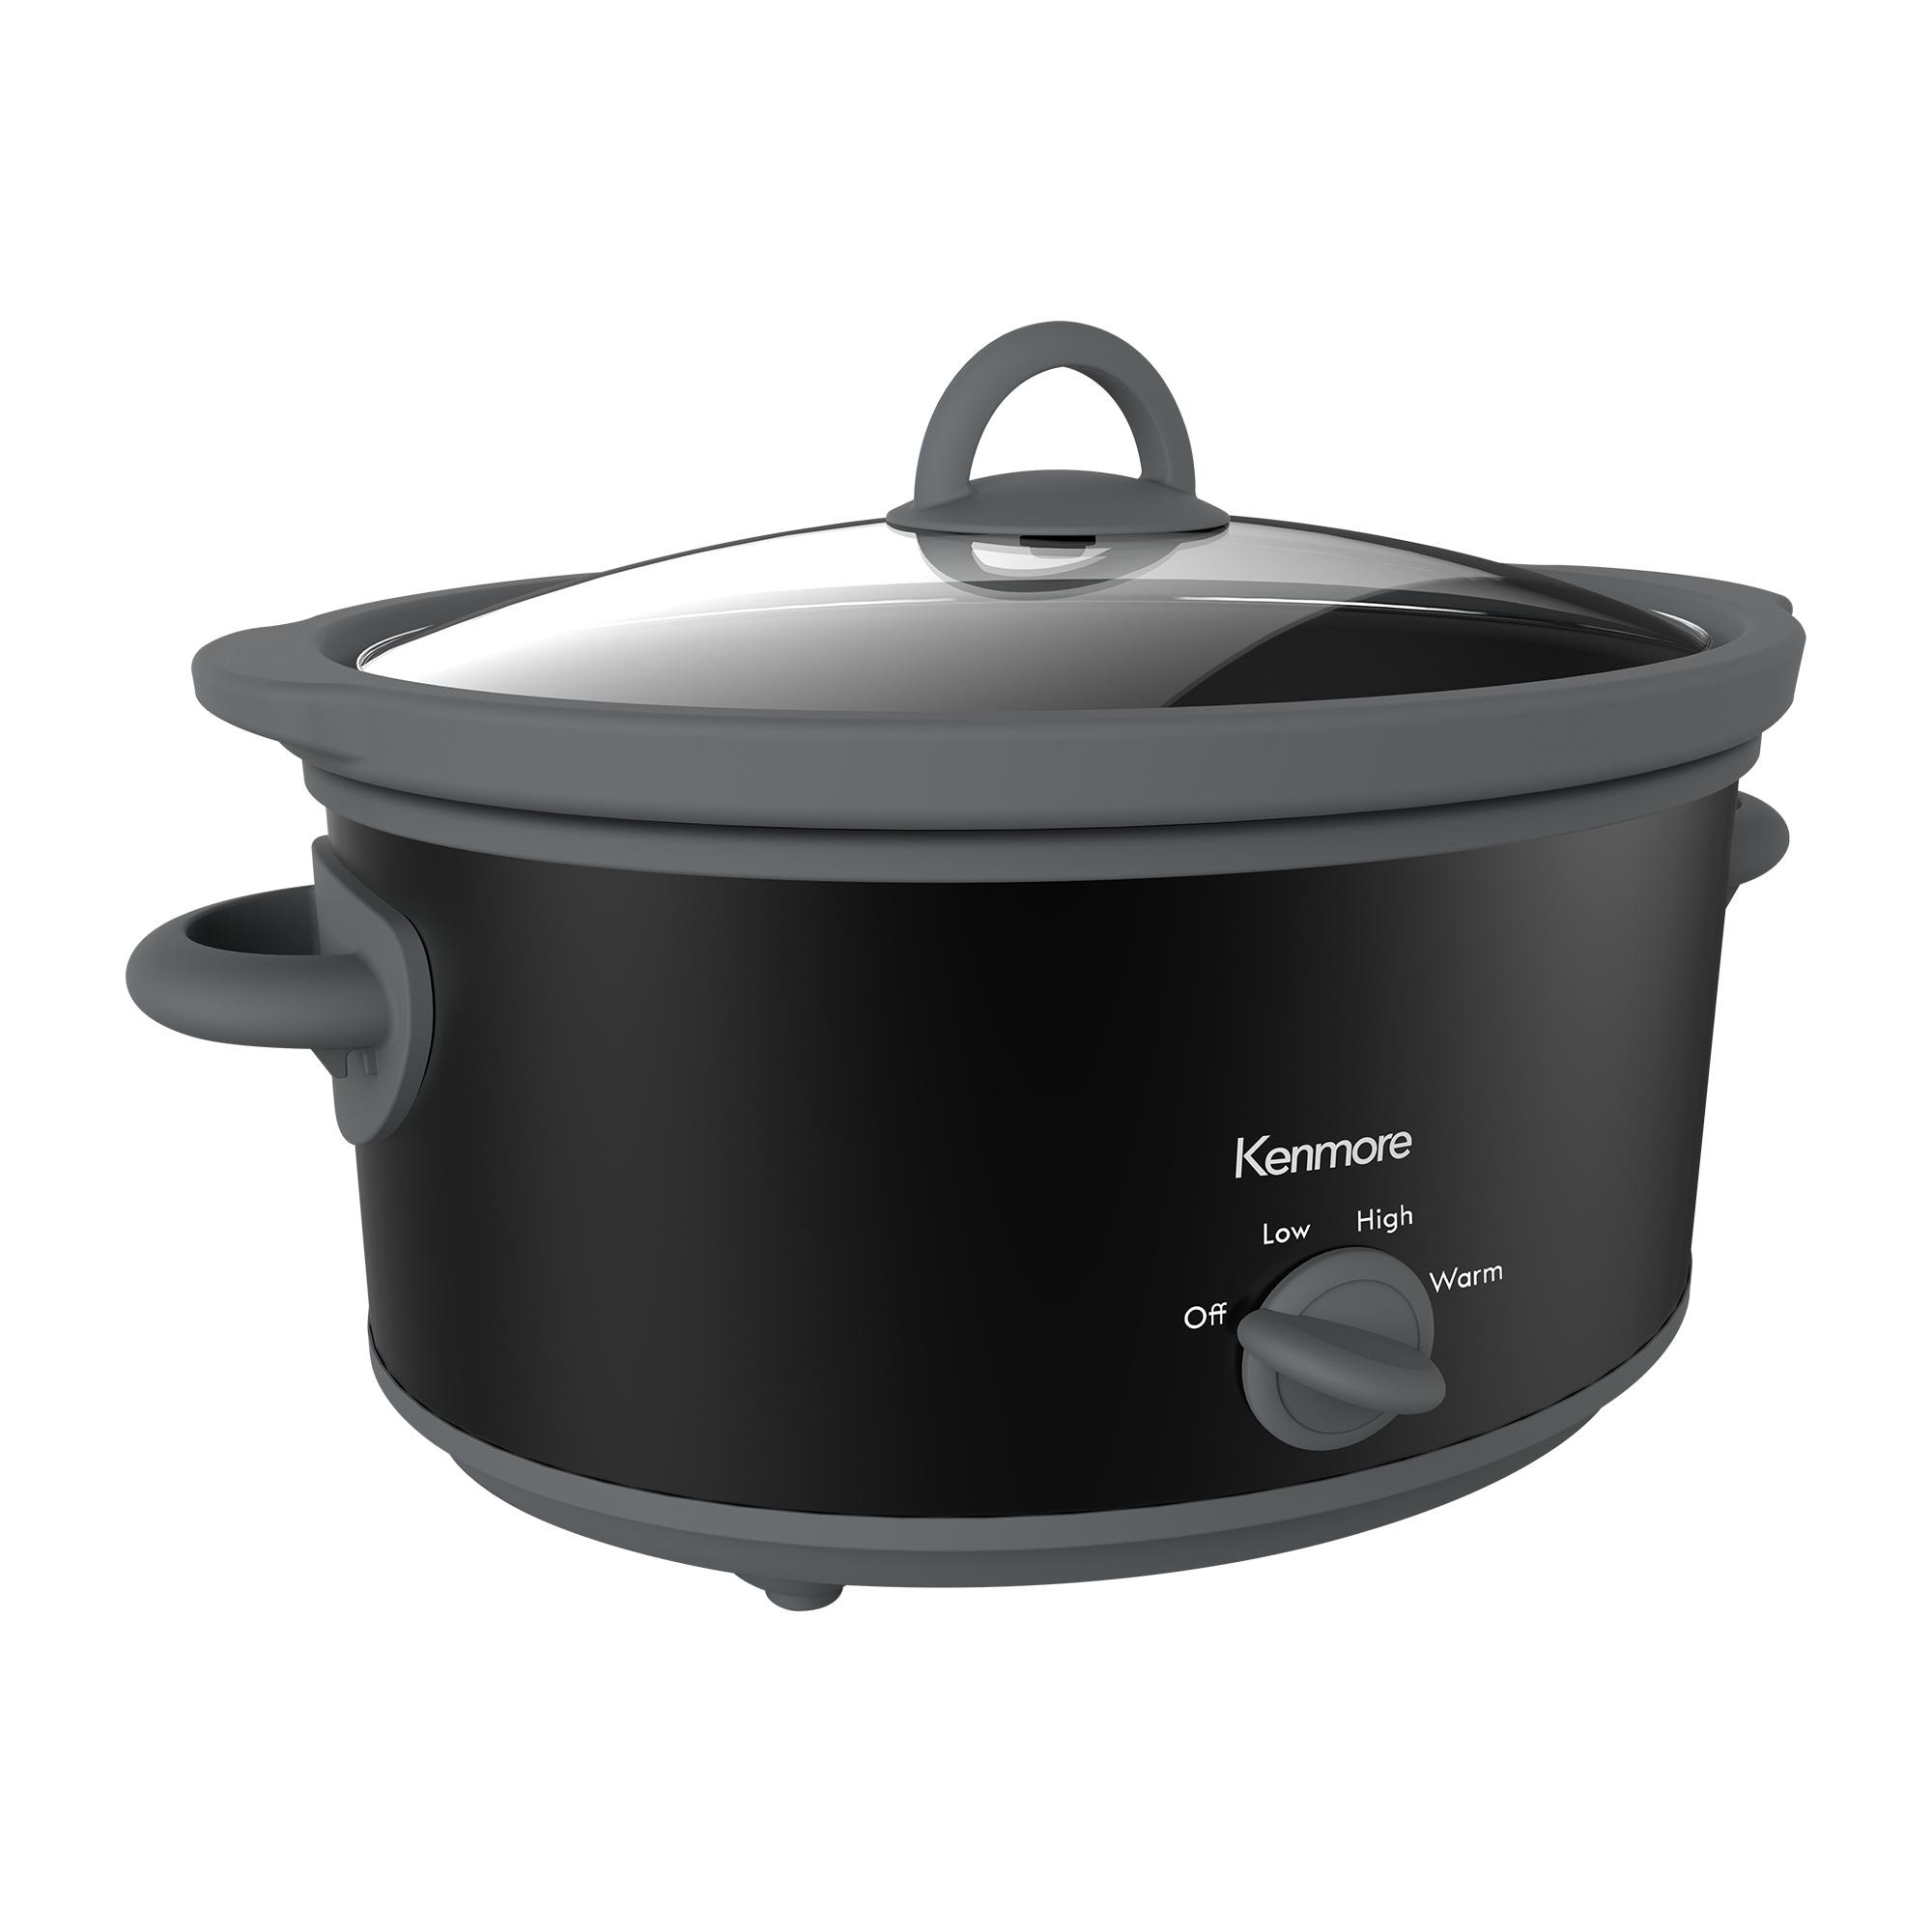 https://ak1.ostkcdn.com/images/products/is/images/direct/c61ef5bd759c9cac771f88848dae93df2c4e2b07/Kenmore-5-Quart-Slow-Cooker%2C-Black.jpg